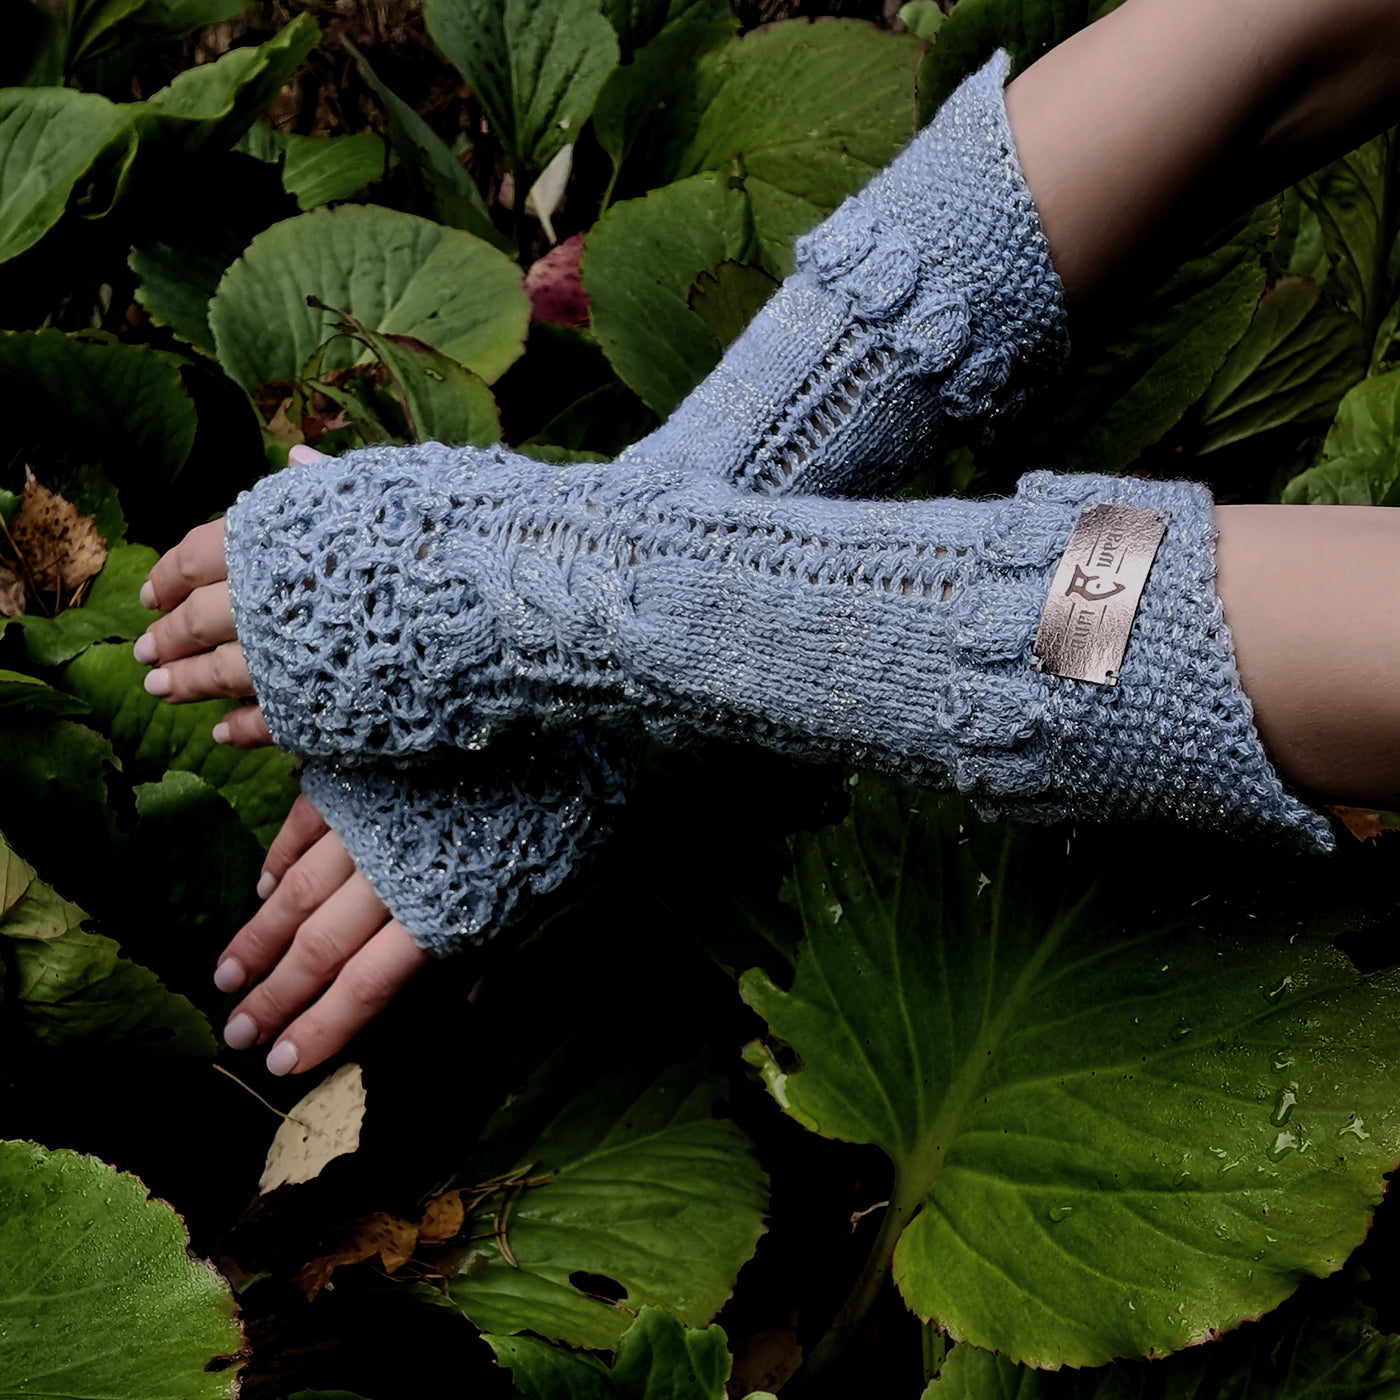 Handmade knitted icy blue arm warmers